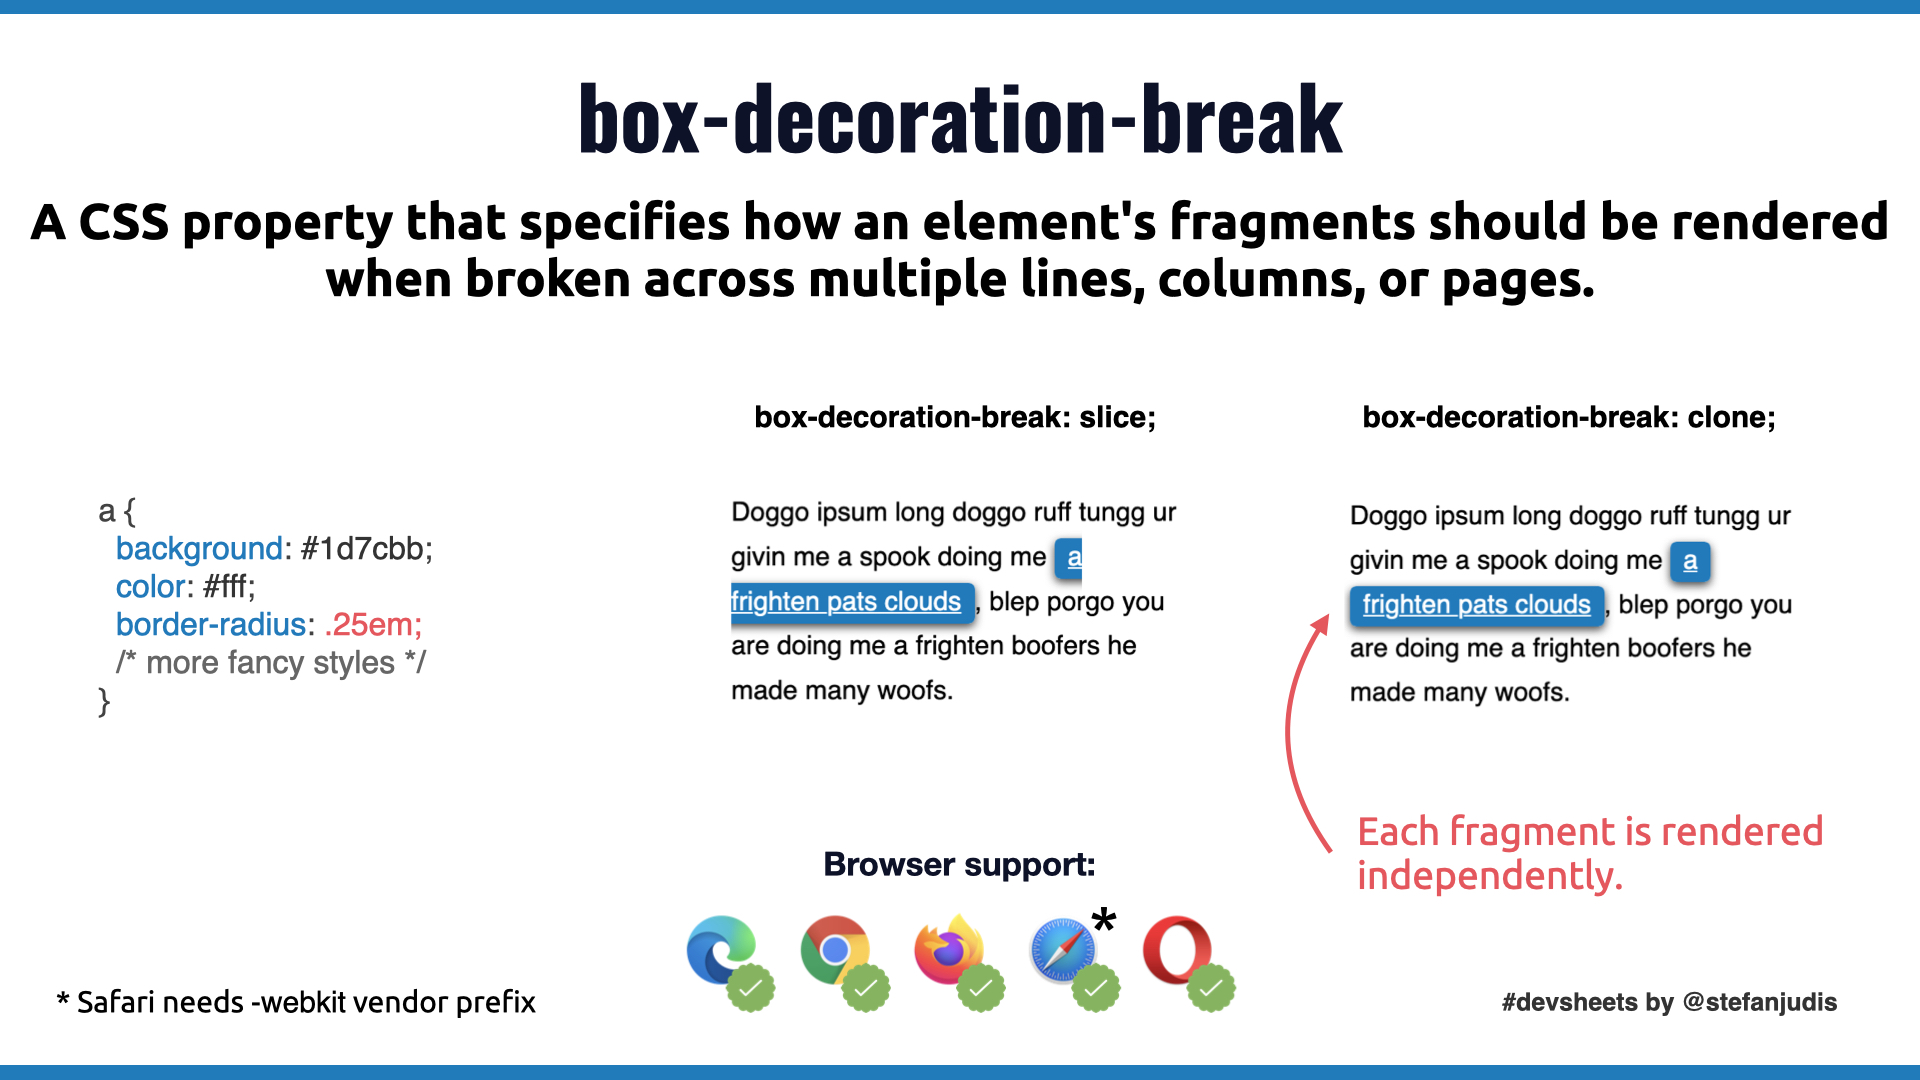 DevSheet showing the difference between box-decoration-break: clone and box-decoration-break: slice